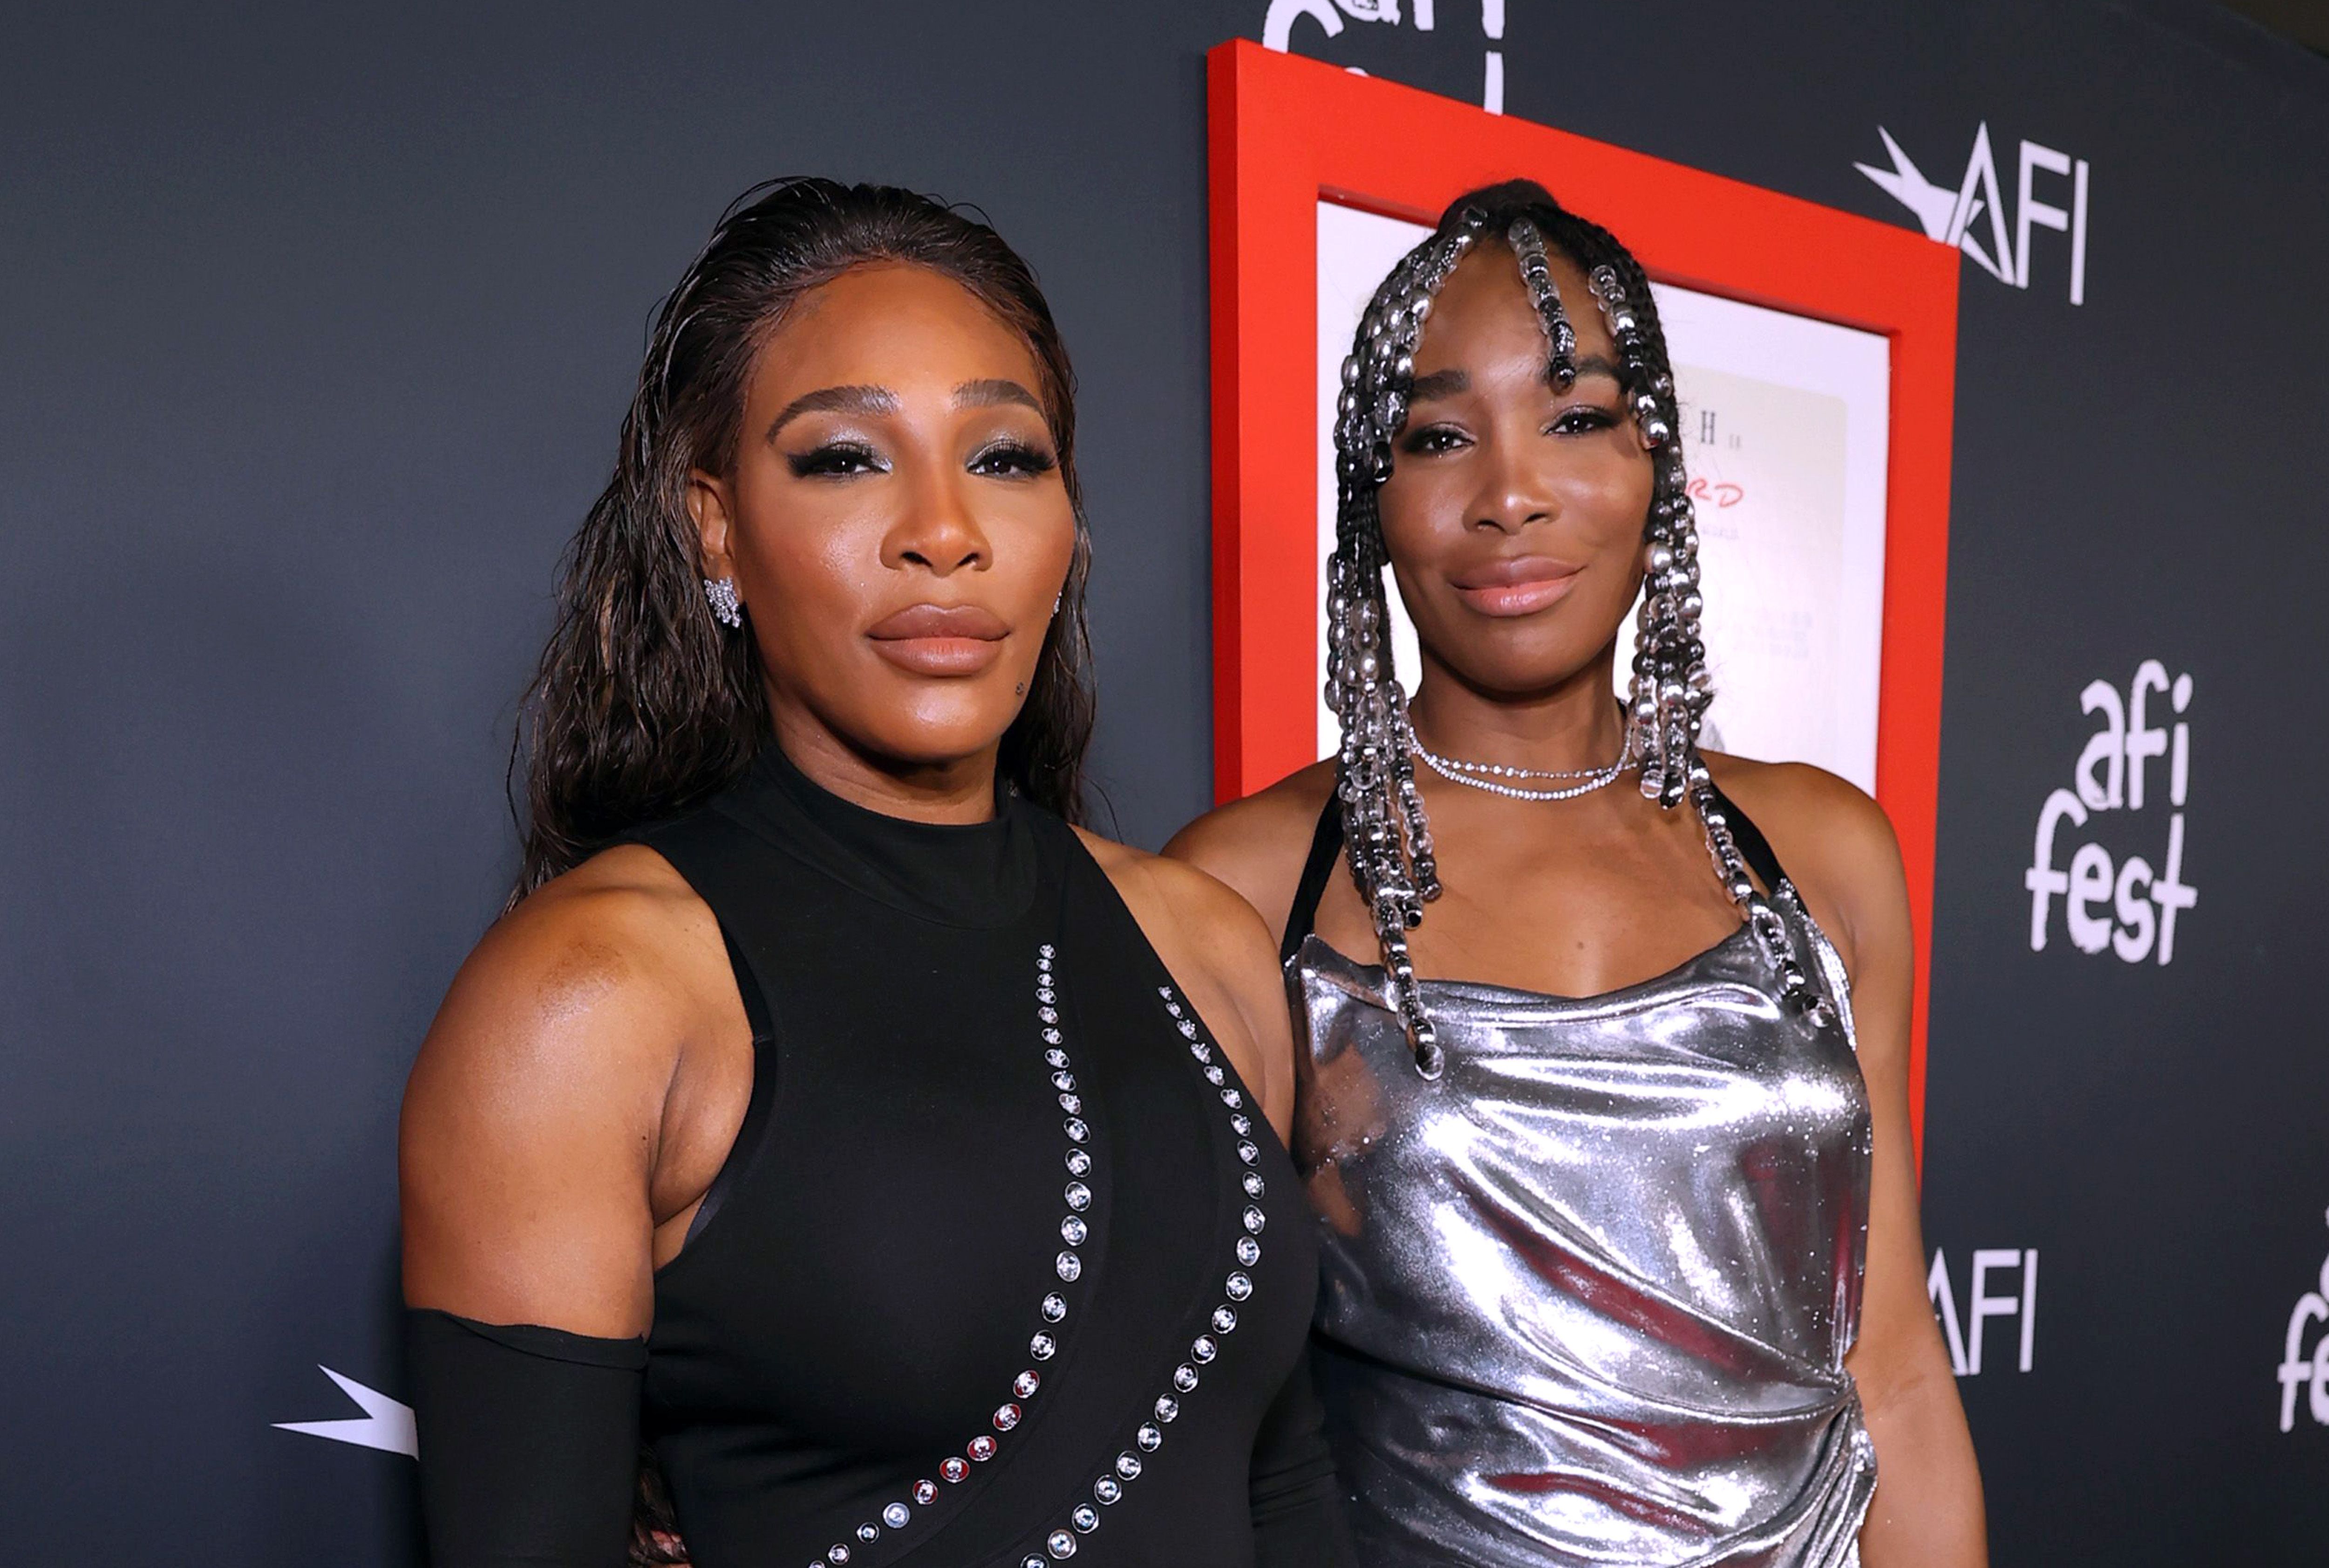 Serena Williams and Venus Williams on November 14, 2021, in Hollywood, California. | Source: Getty Images